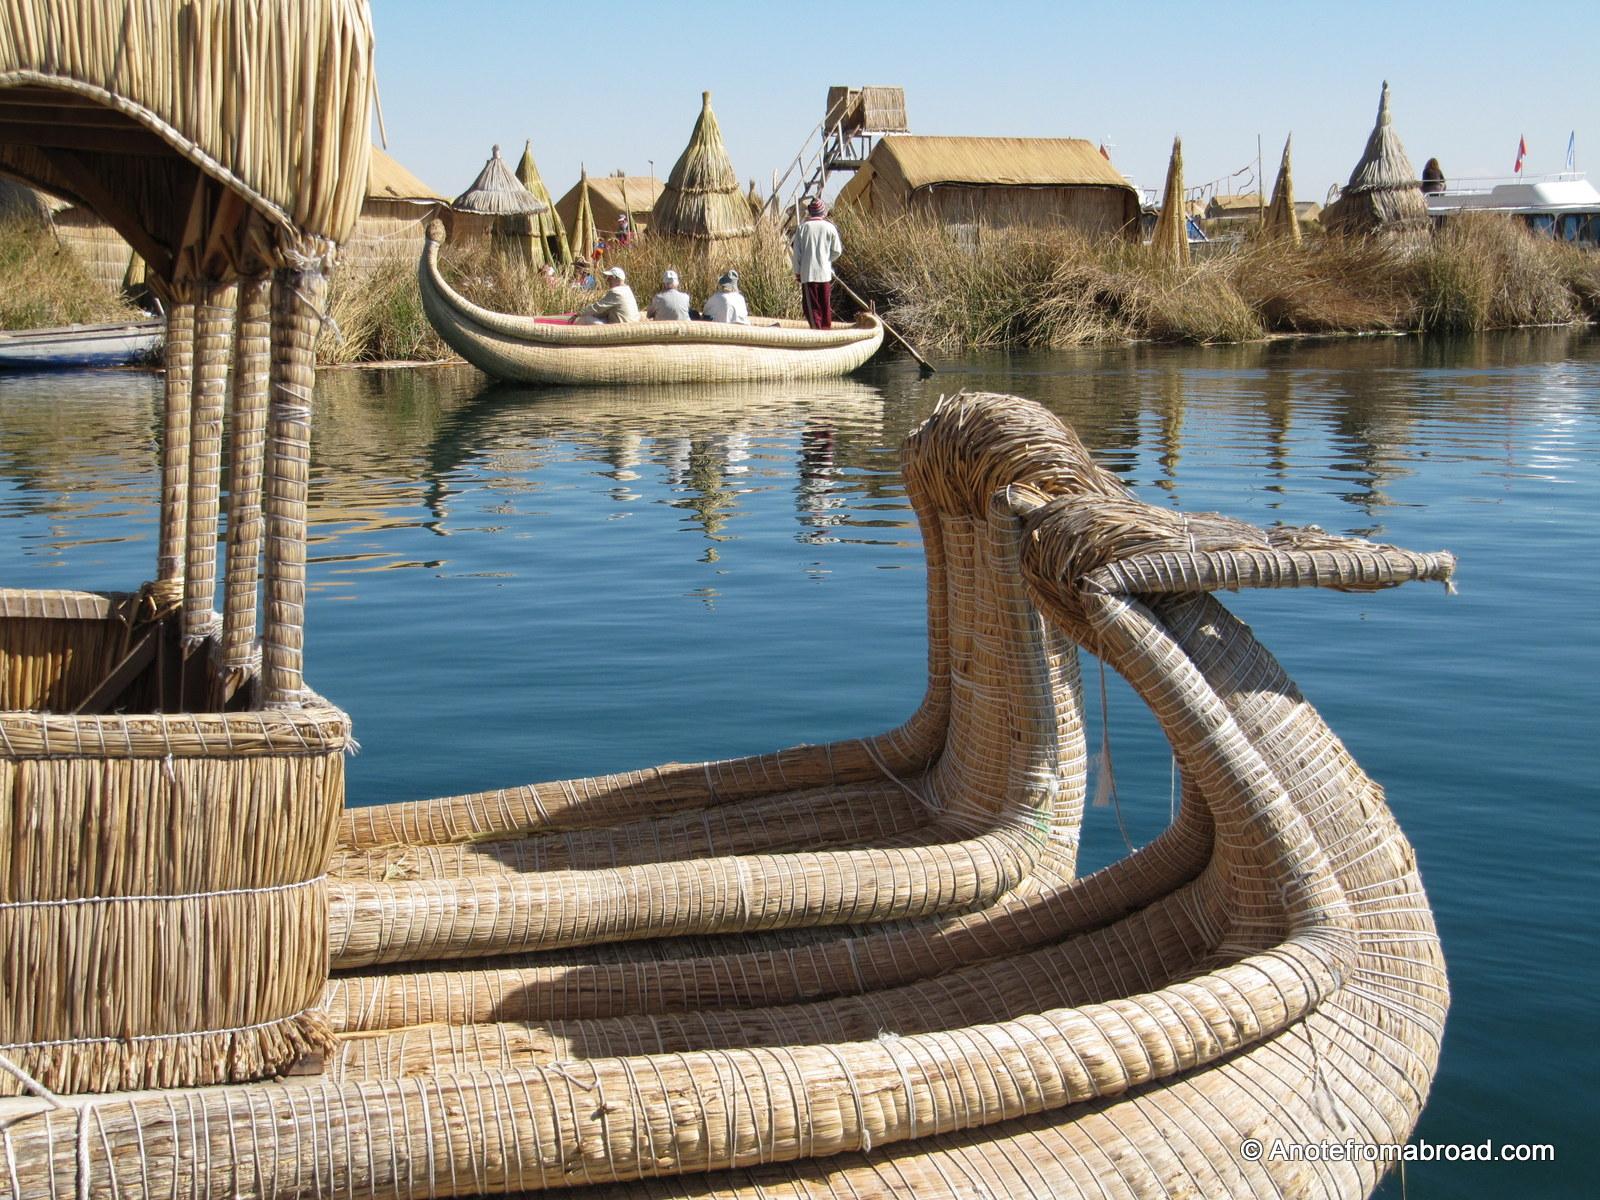 LAKE TITICACA: Puno, Uros Floating Islands and Taquile. A Note From